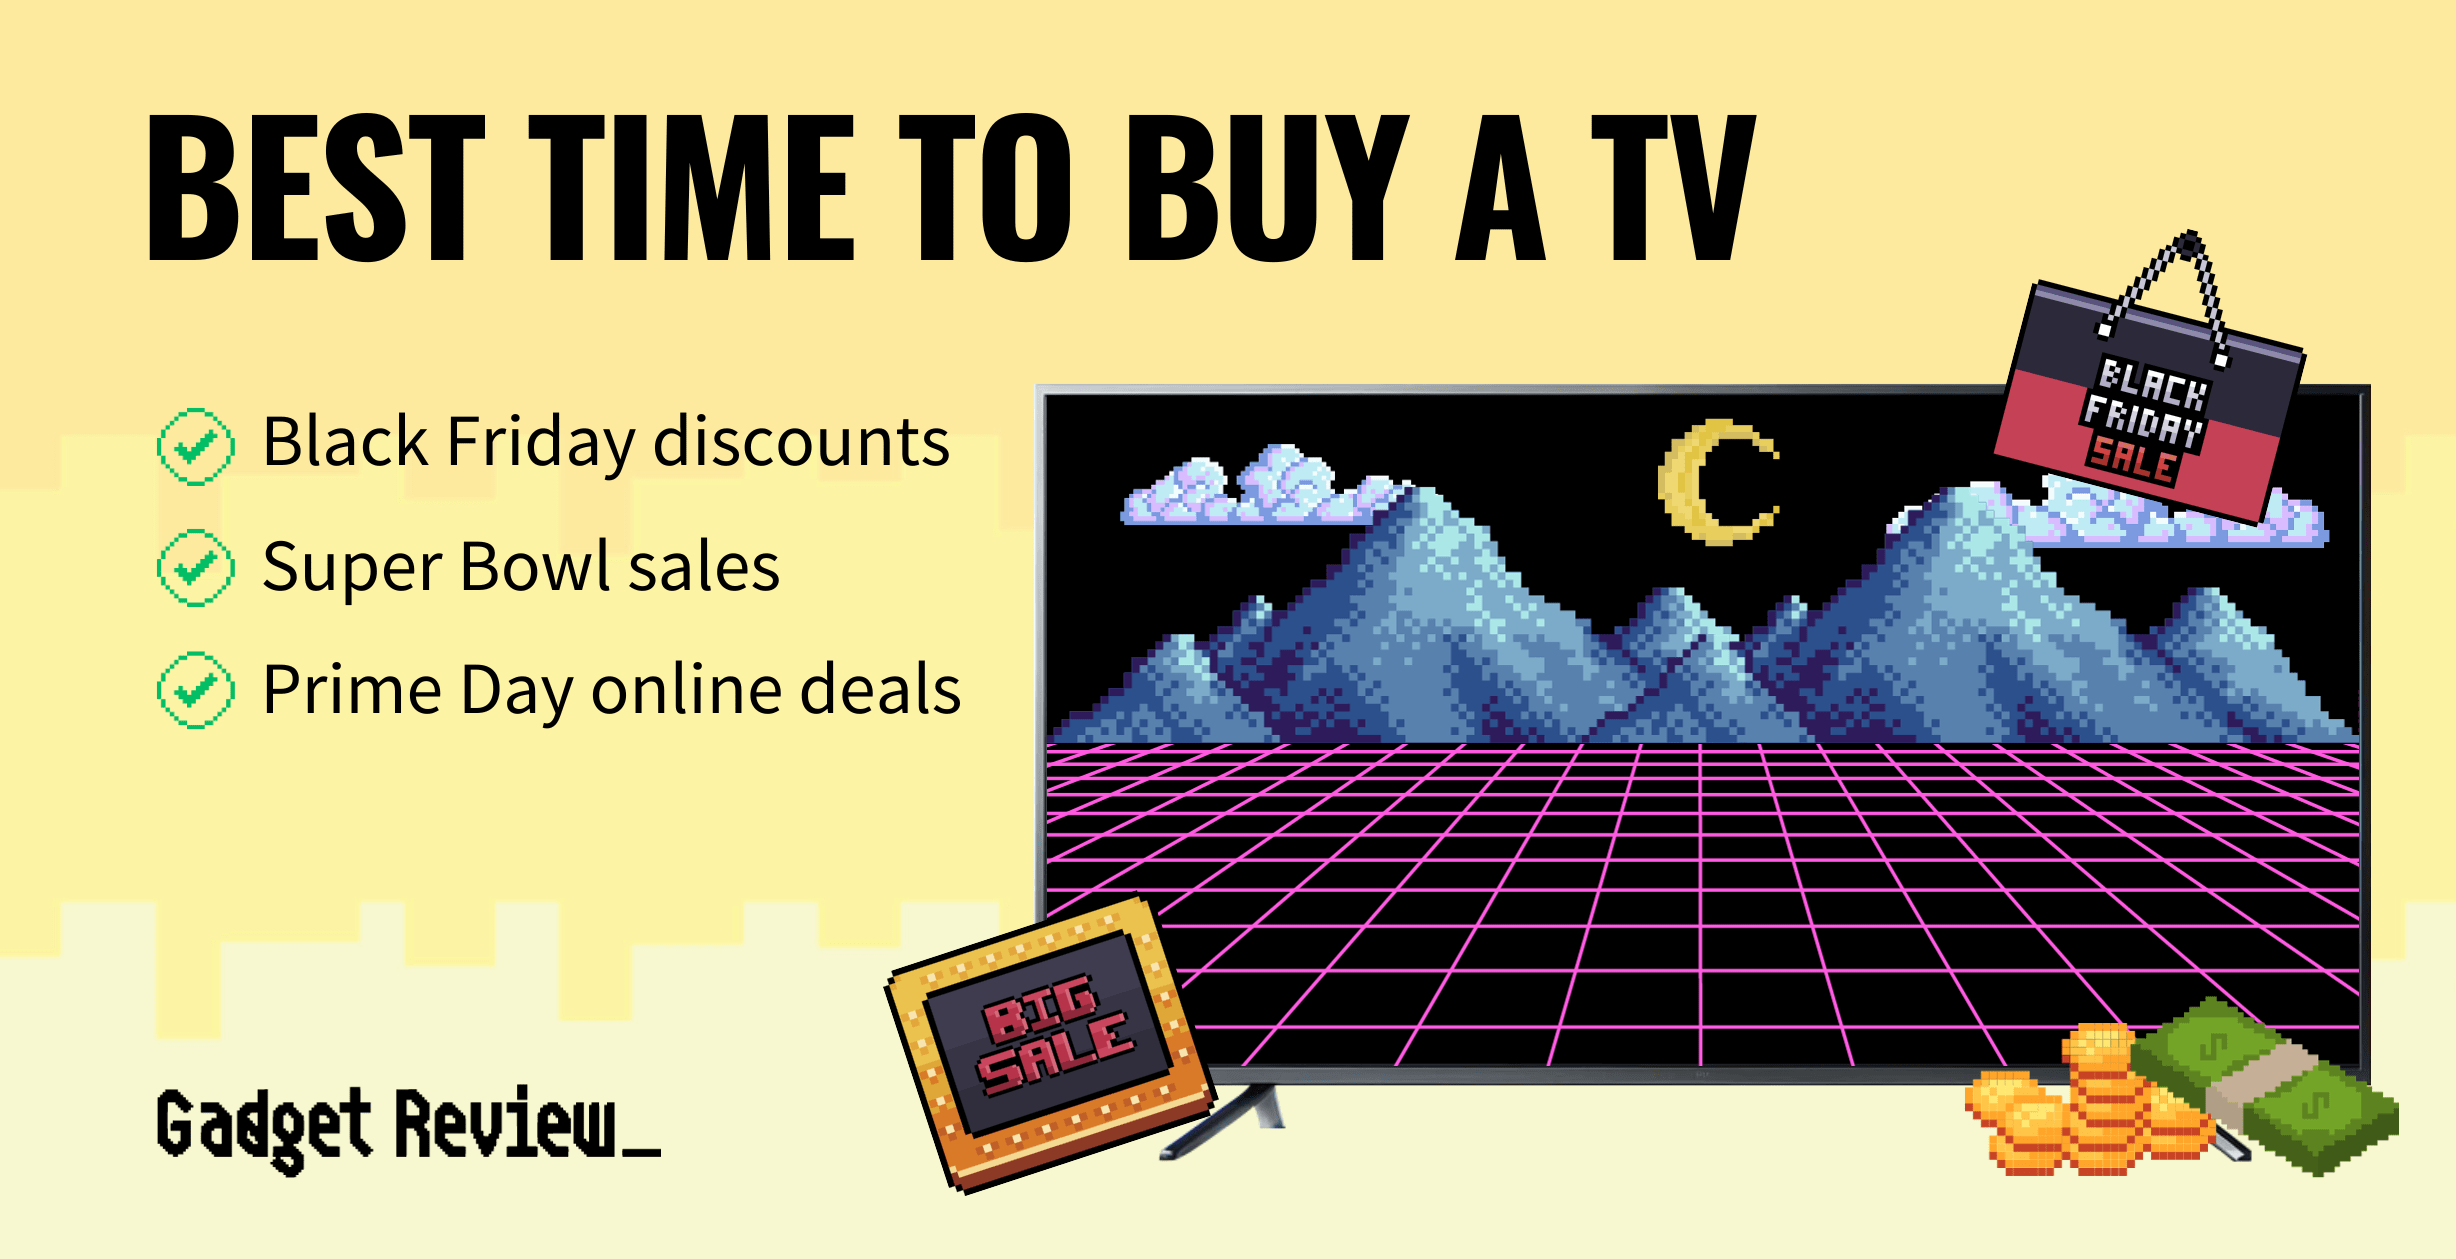 The Best Time to Buy a TV